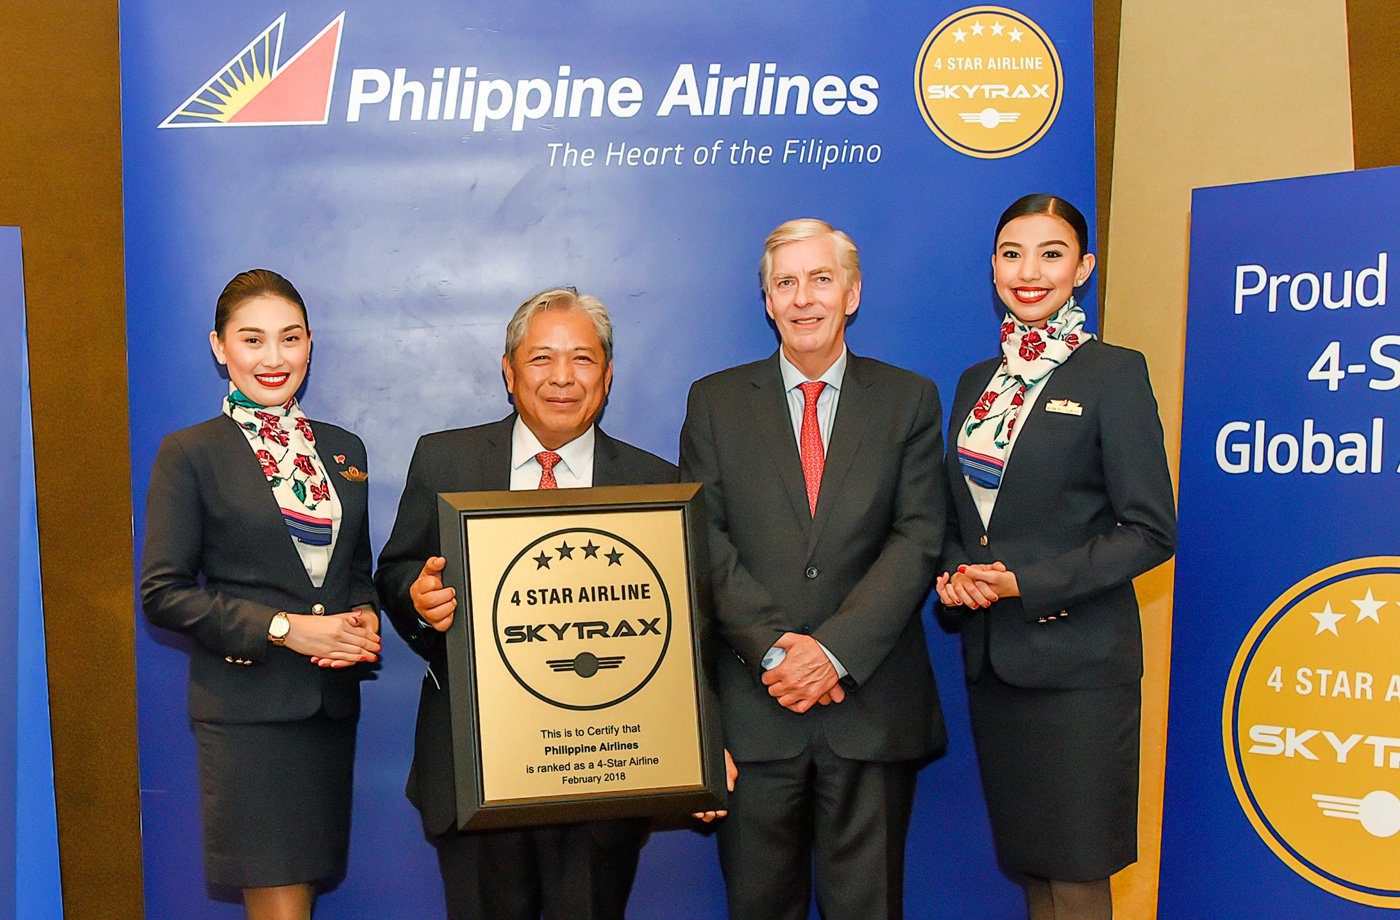 PAL certified as 4-star airline